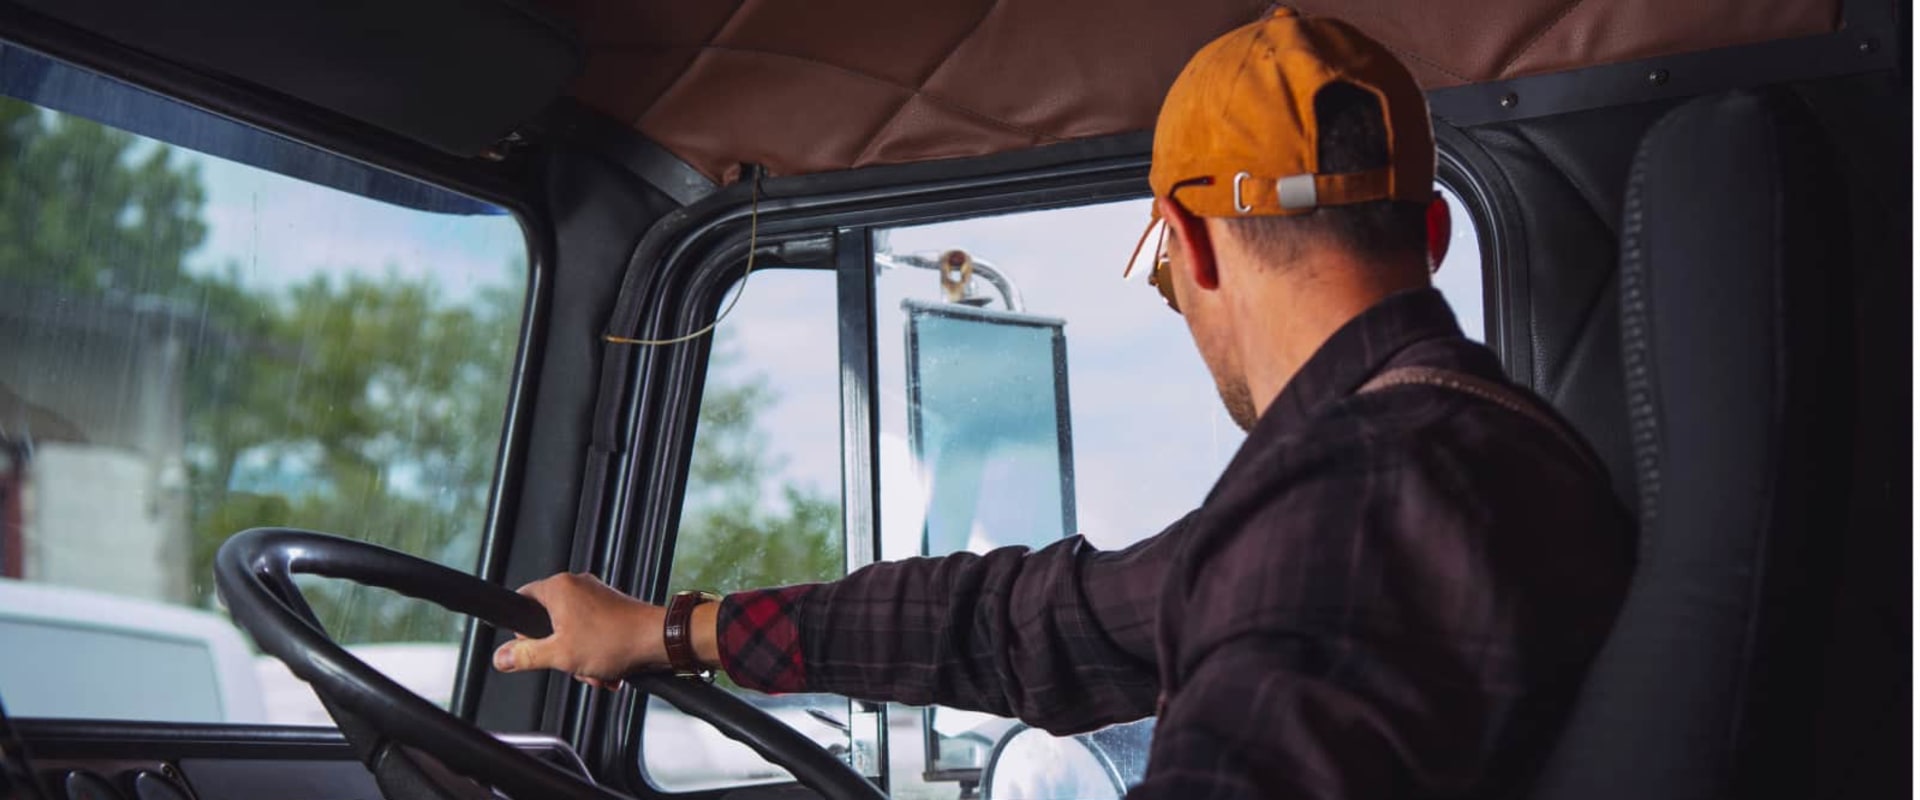 How long does it take to make good money as a truck driver?